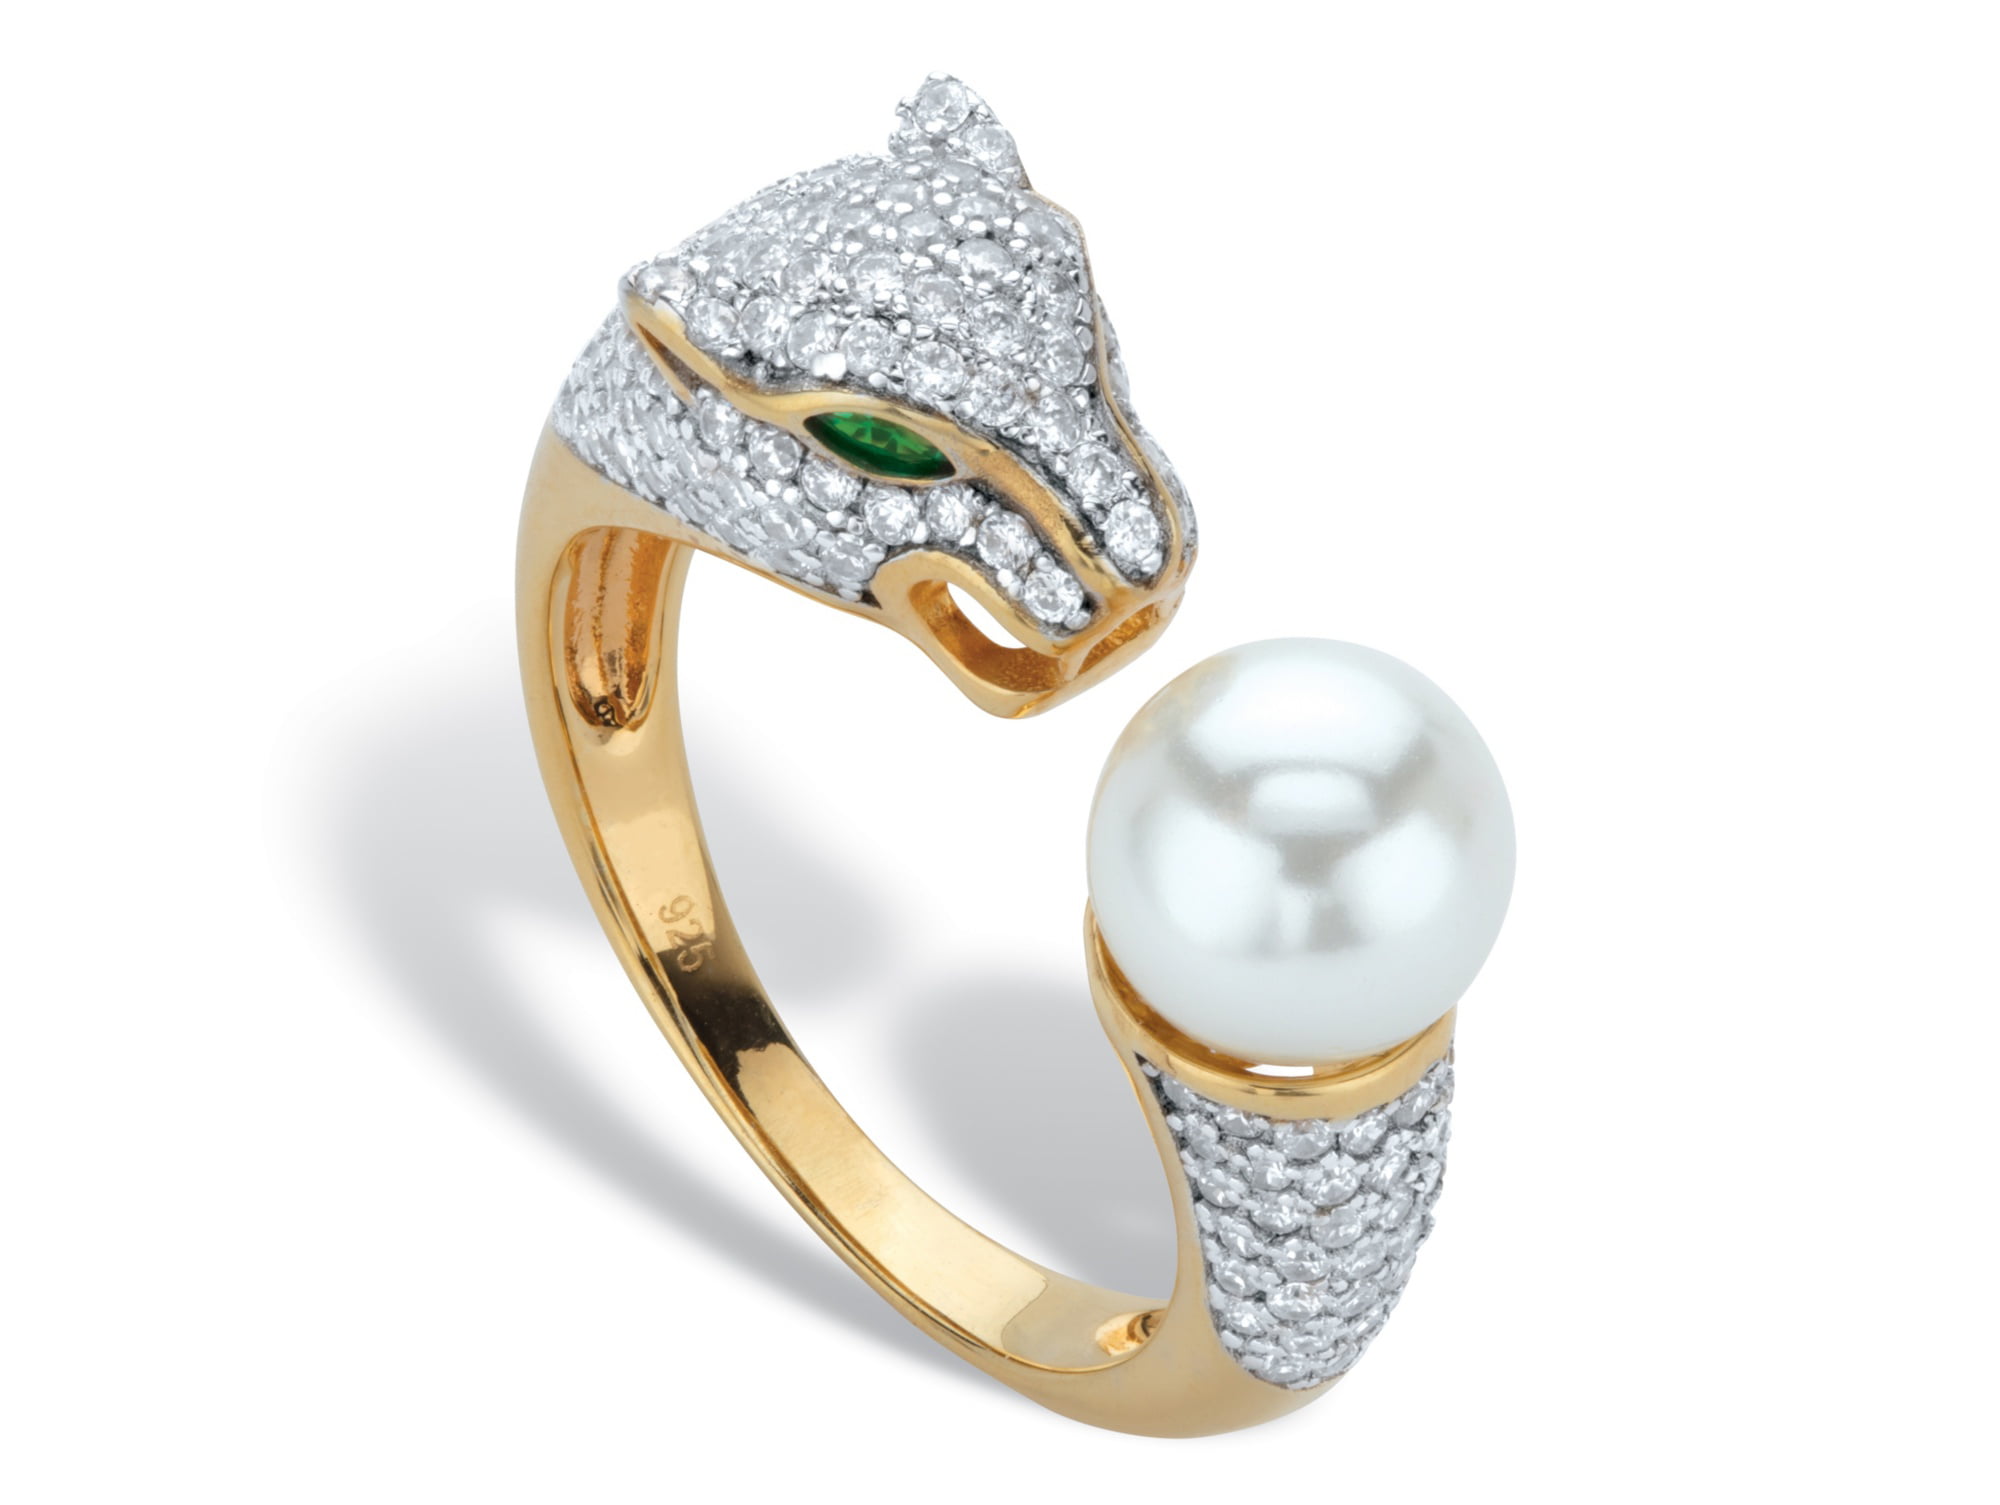 Details about   .64 TCW 14k Gold over Silver Genuine Cultured Freshwater 8mm Pearl and CZ Ring 